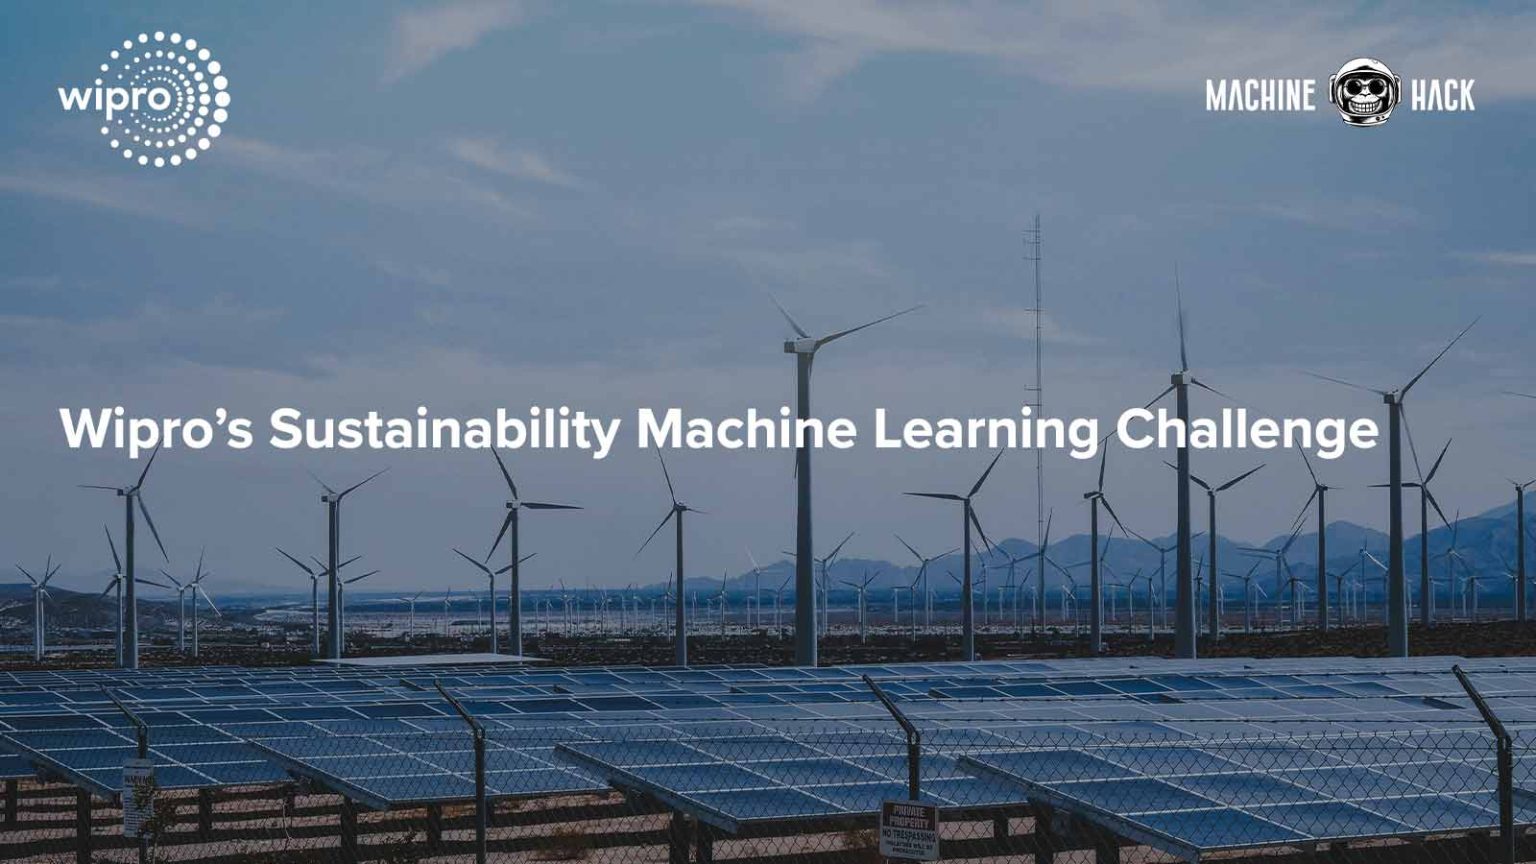 A chance to win prizes worth INR 3 lakh and be a part of Wipro! Sign up for Wipro’s Sustainability Machine Learning Hackathon